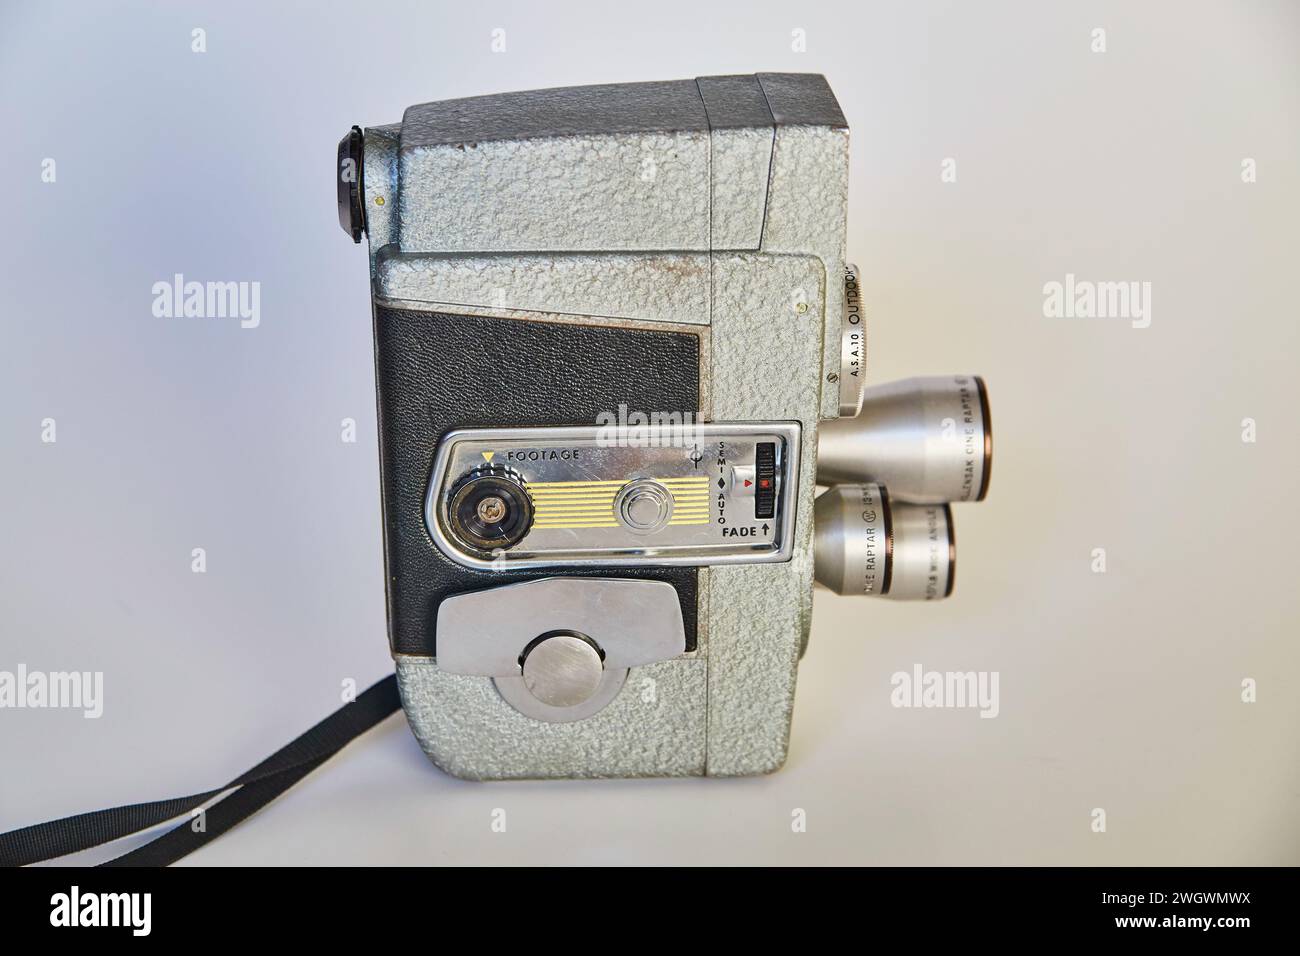 Vintage Super 8 Film Camera with Dual Lenses on Gray Background Stock Photo